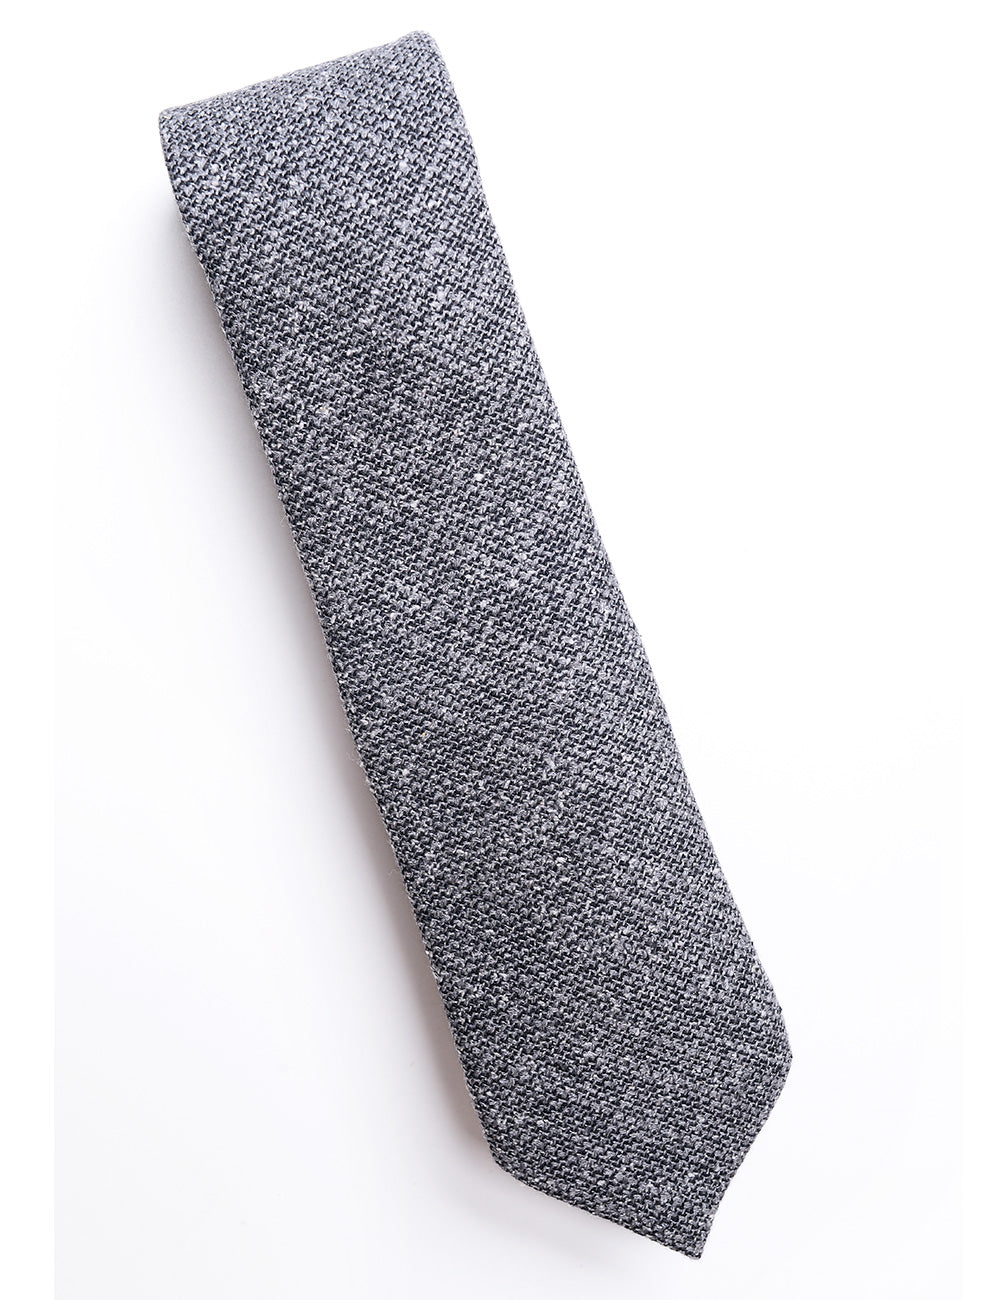 Folded detail of Textured Wool Tie - Ash